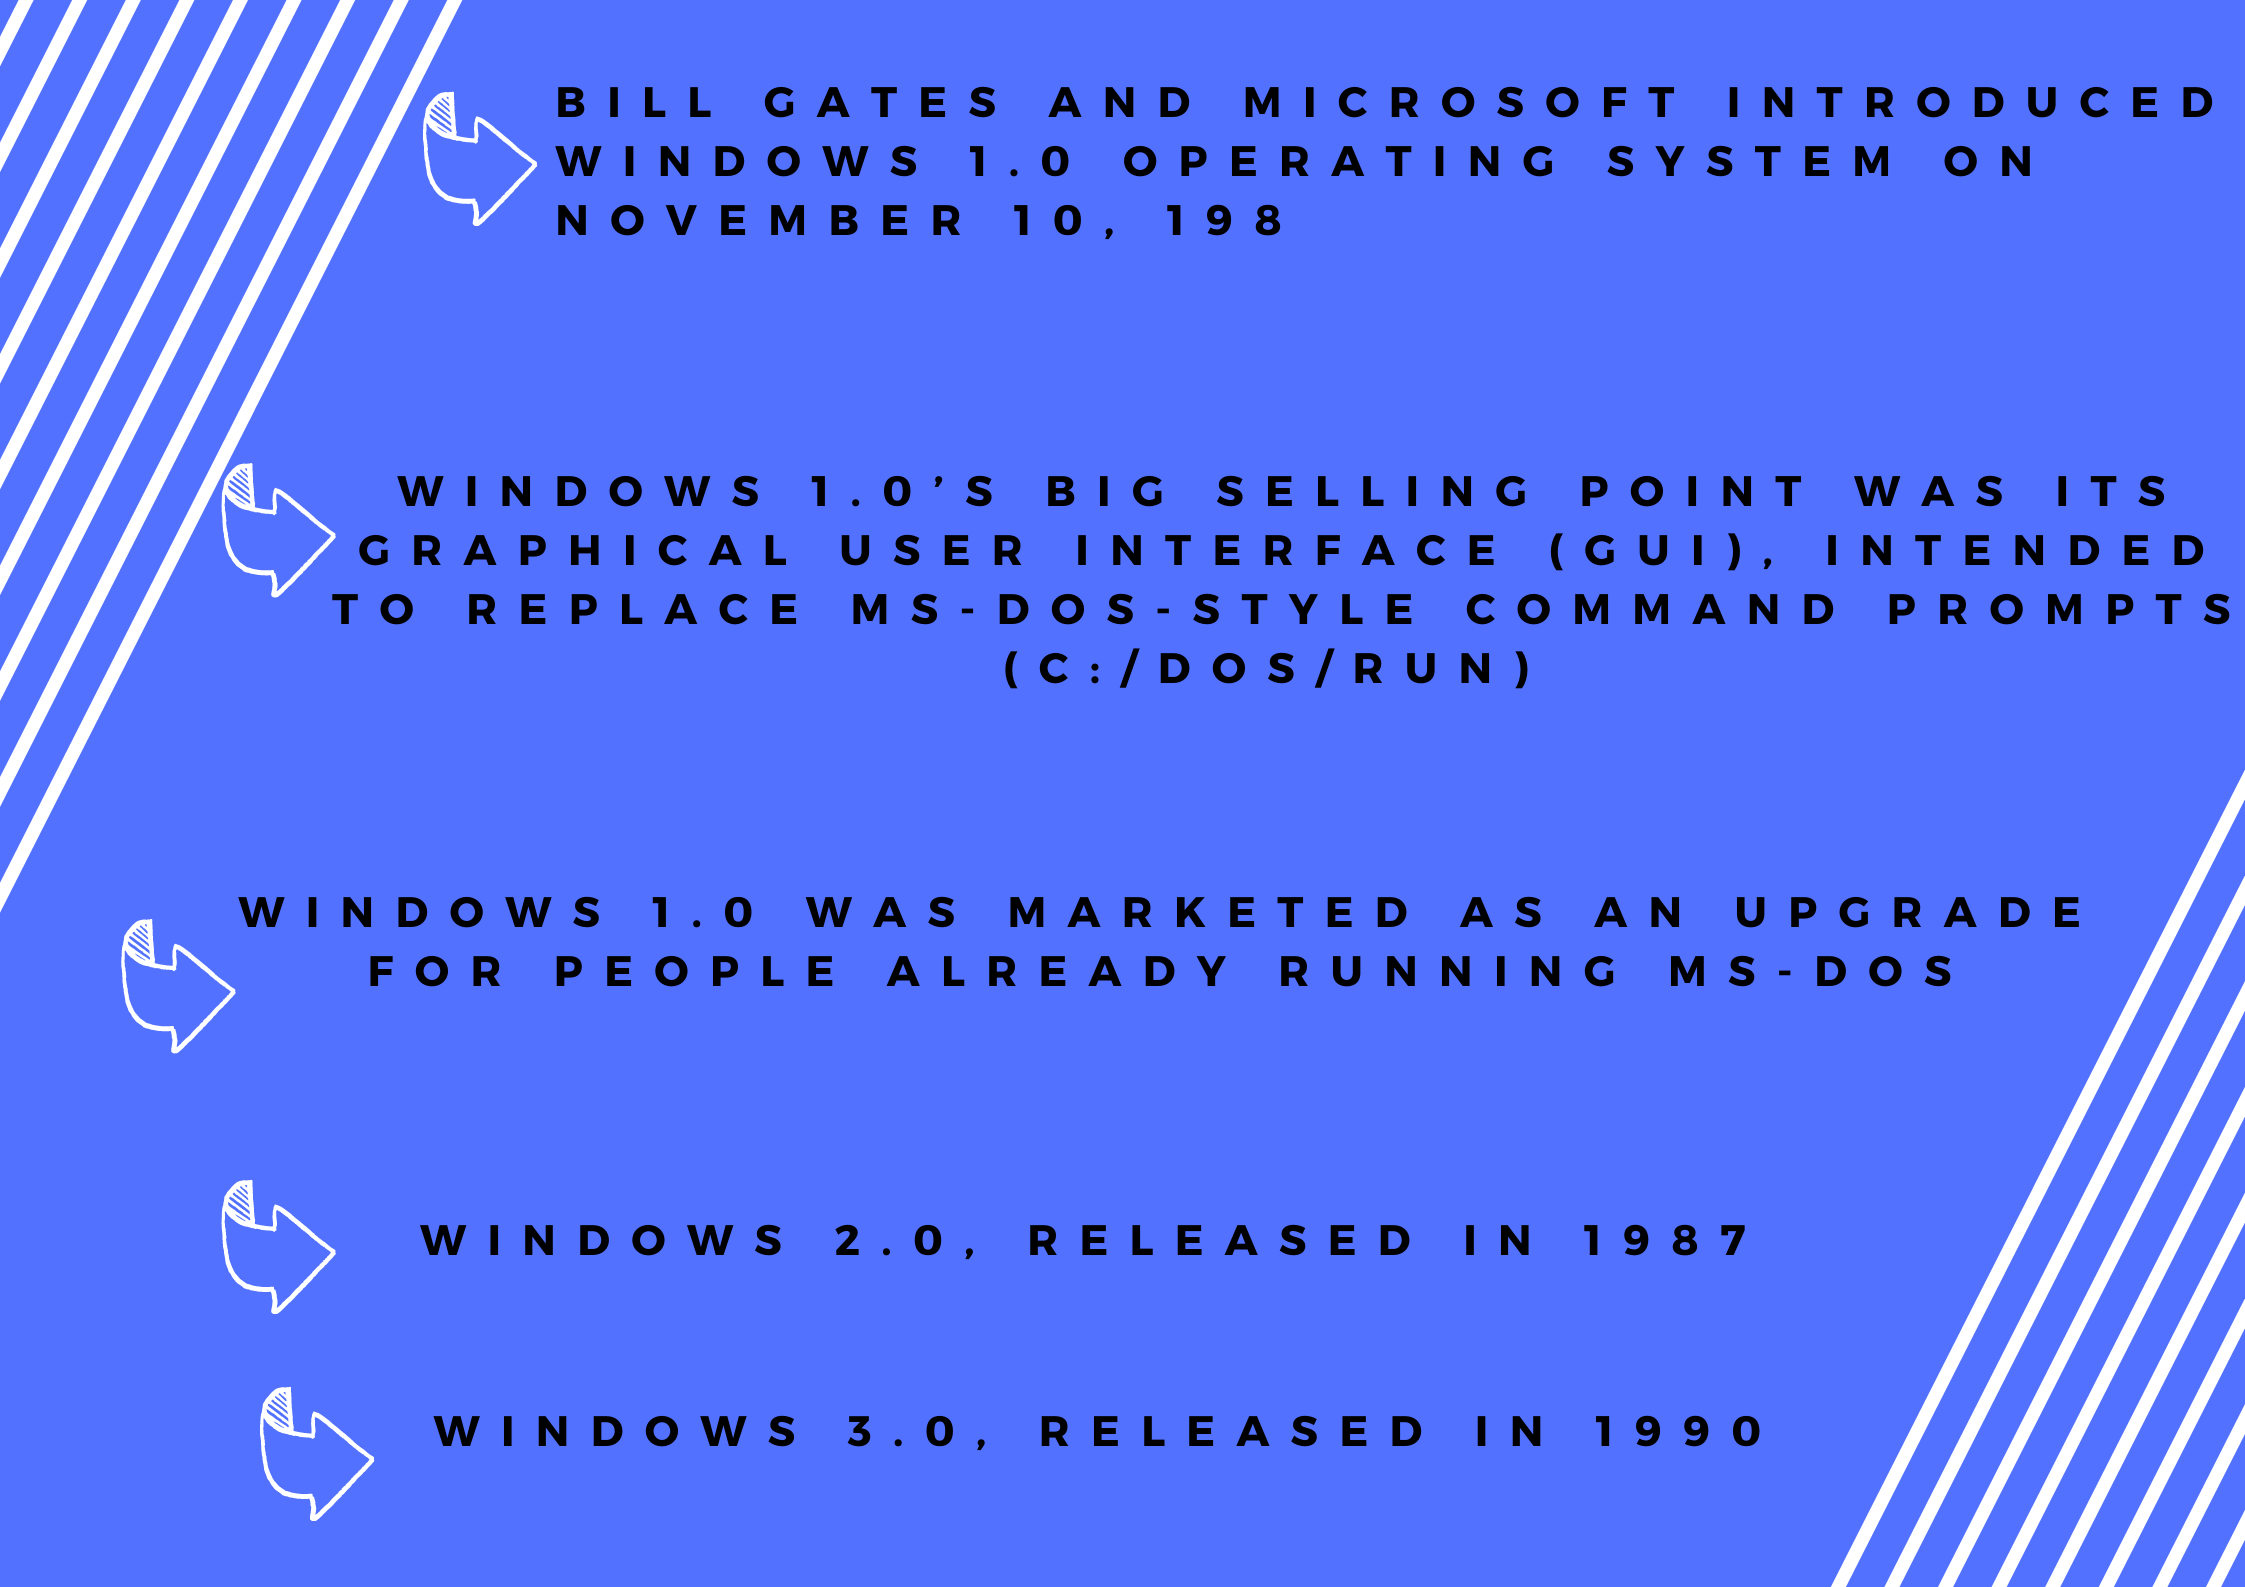 history of microsoft word ,who developed the first version of windows operating system